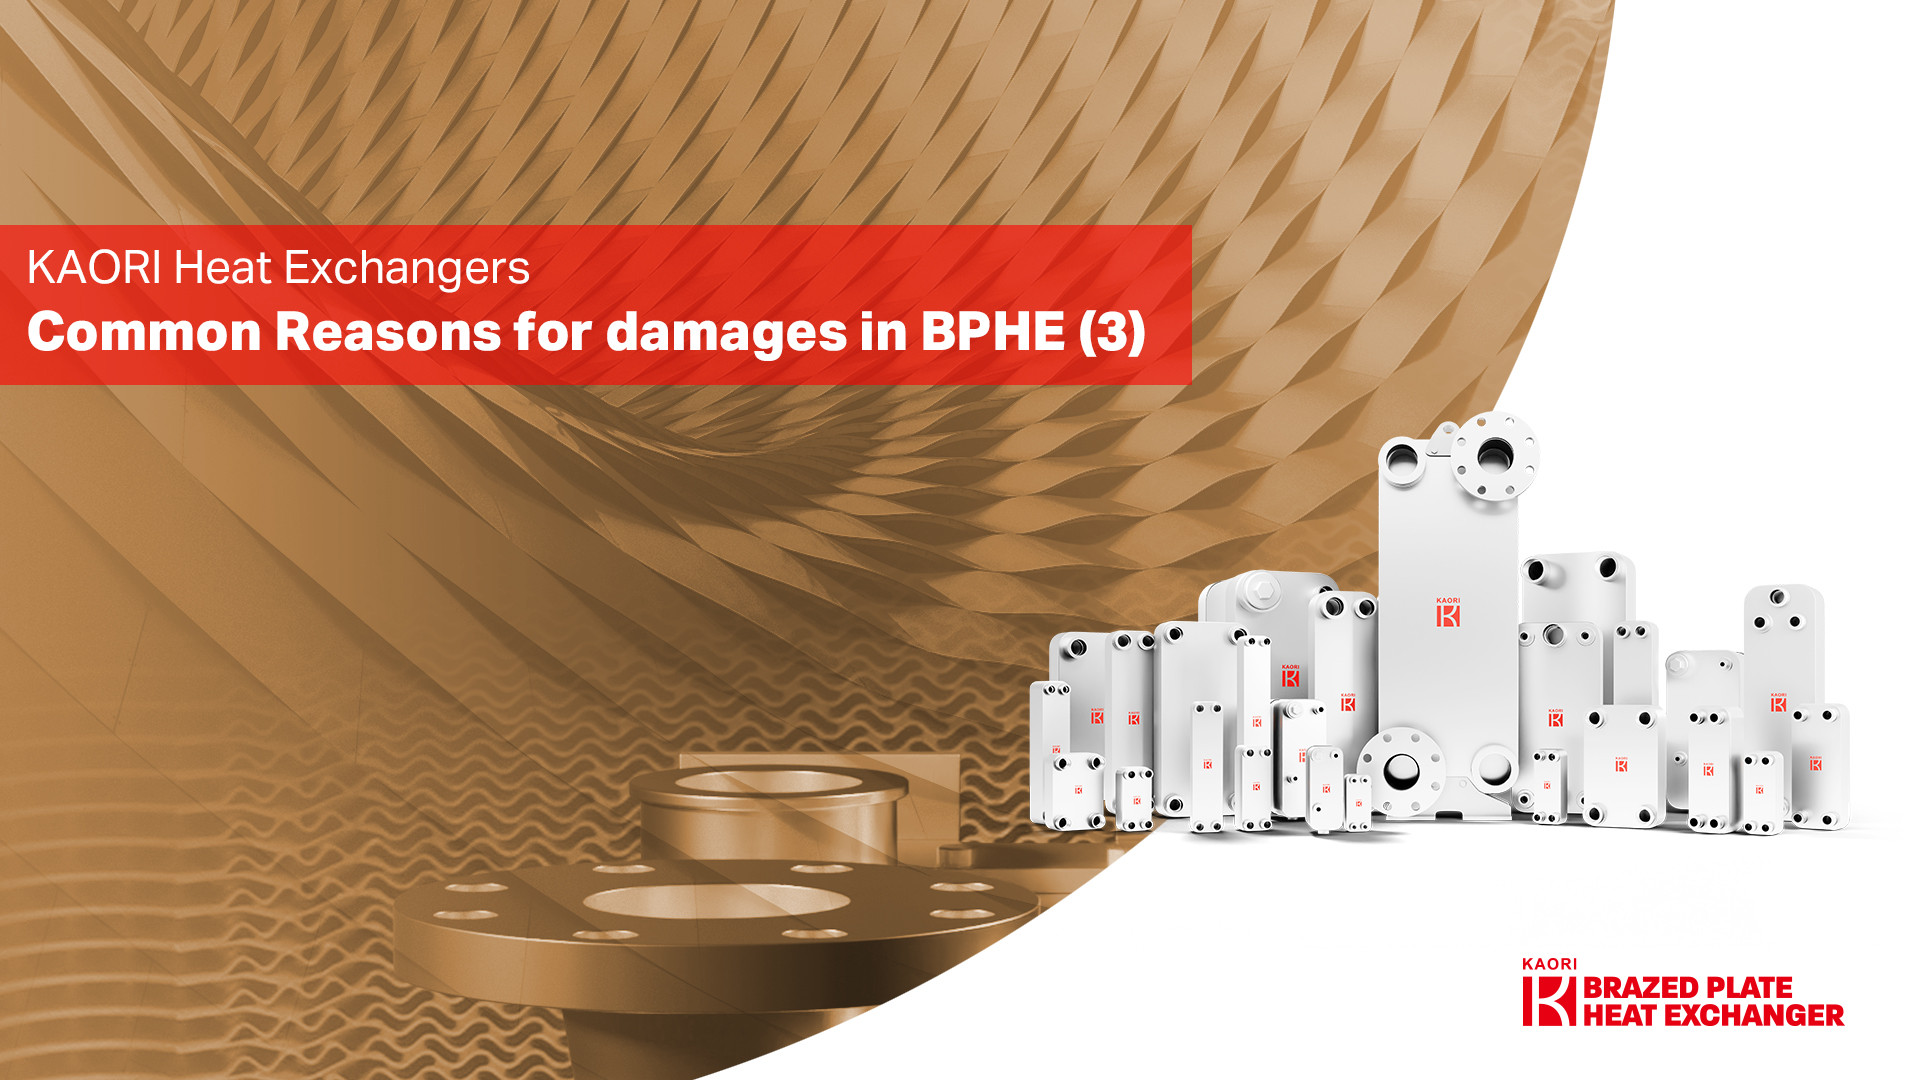  Common Reasons for Damages in BPHEs- (3) Freeze 